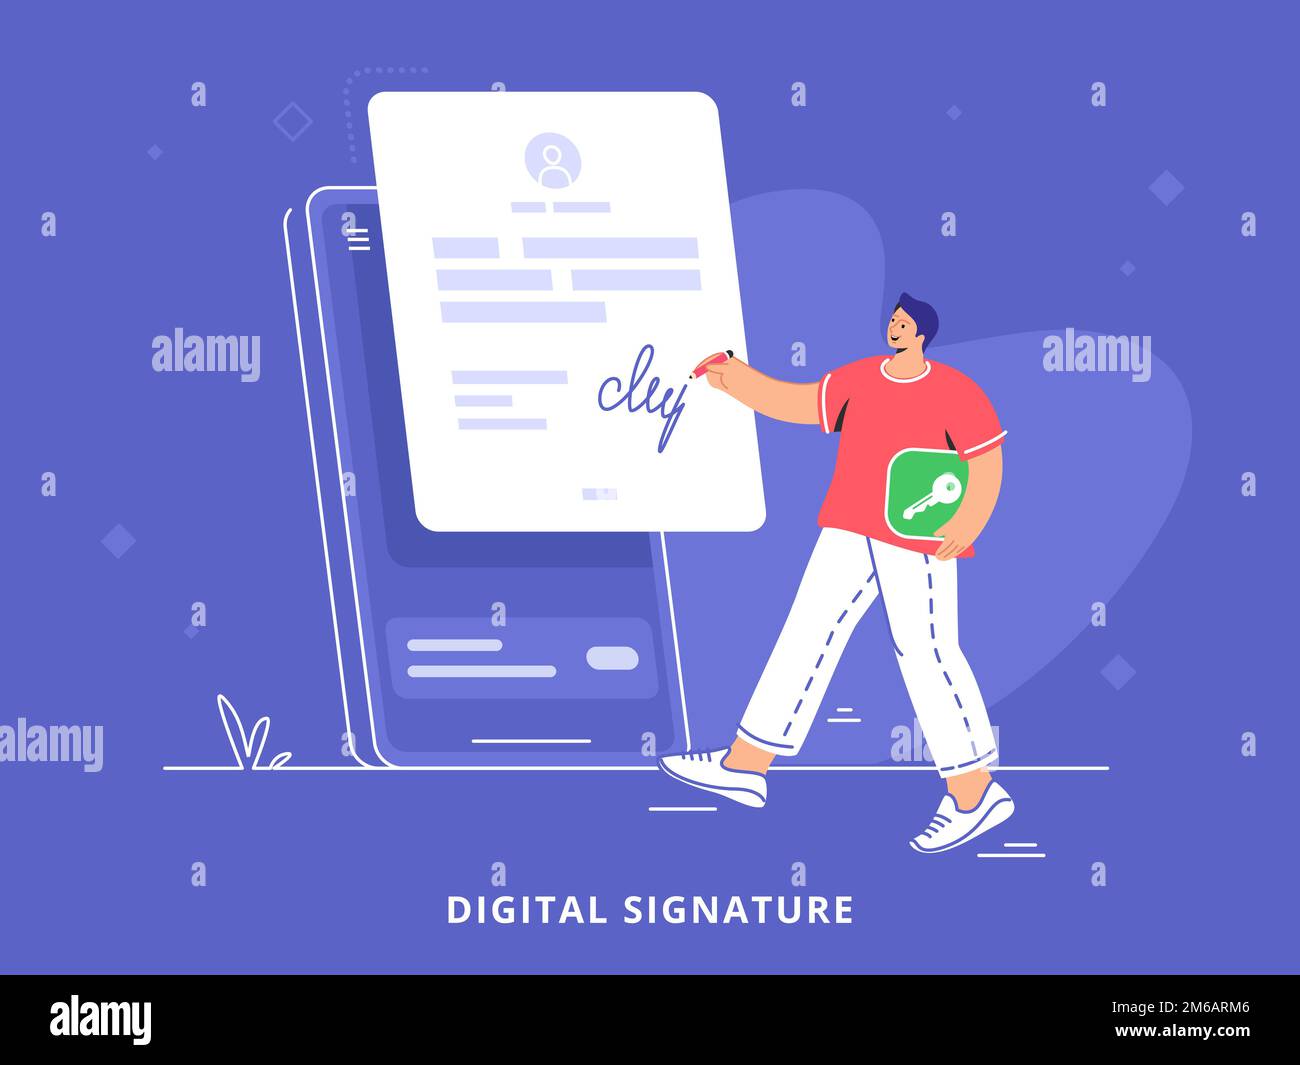 Digital signature on mobile smartphone app for electronic agreement Stock Vector